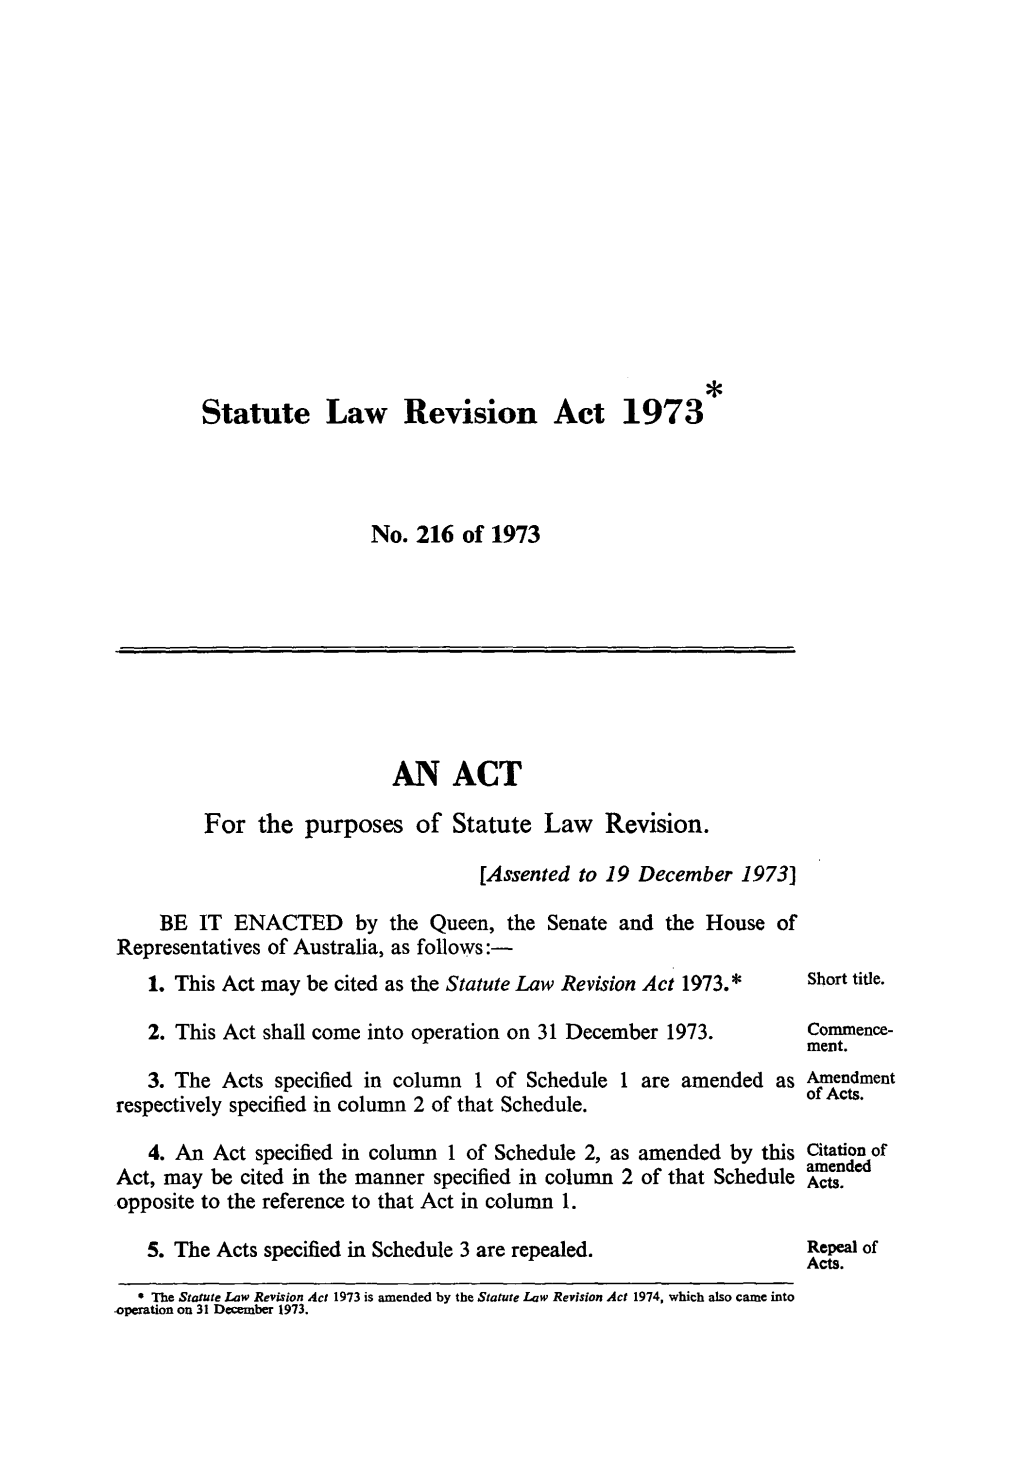 Statute Law Revision Act 1973 AN